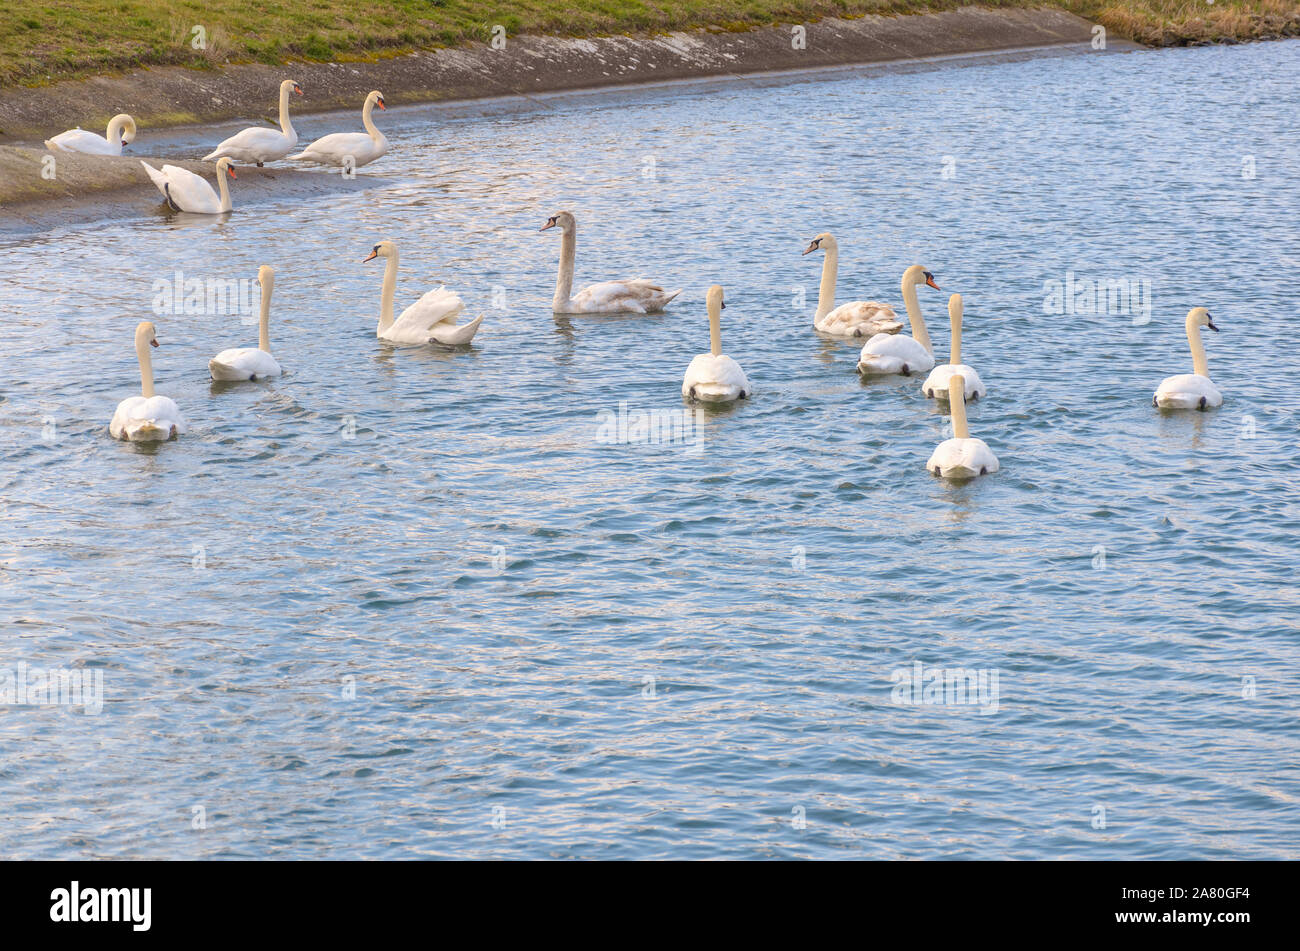 Fourteen white mute swans swimming together away from the camera on rippling water Stock Photo